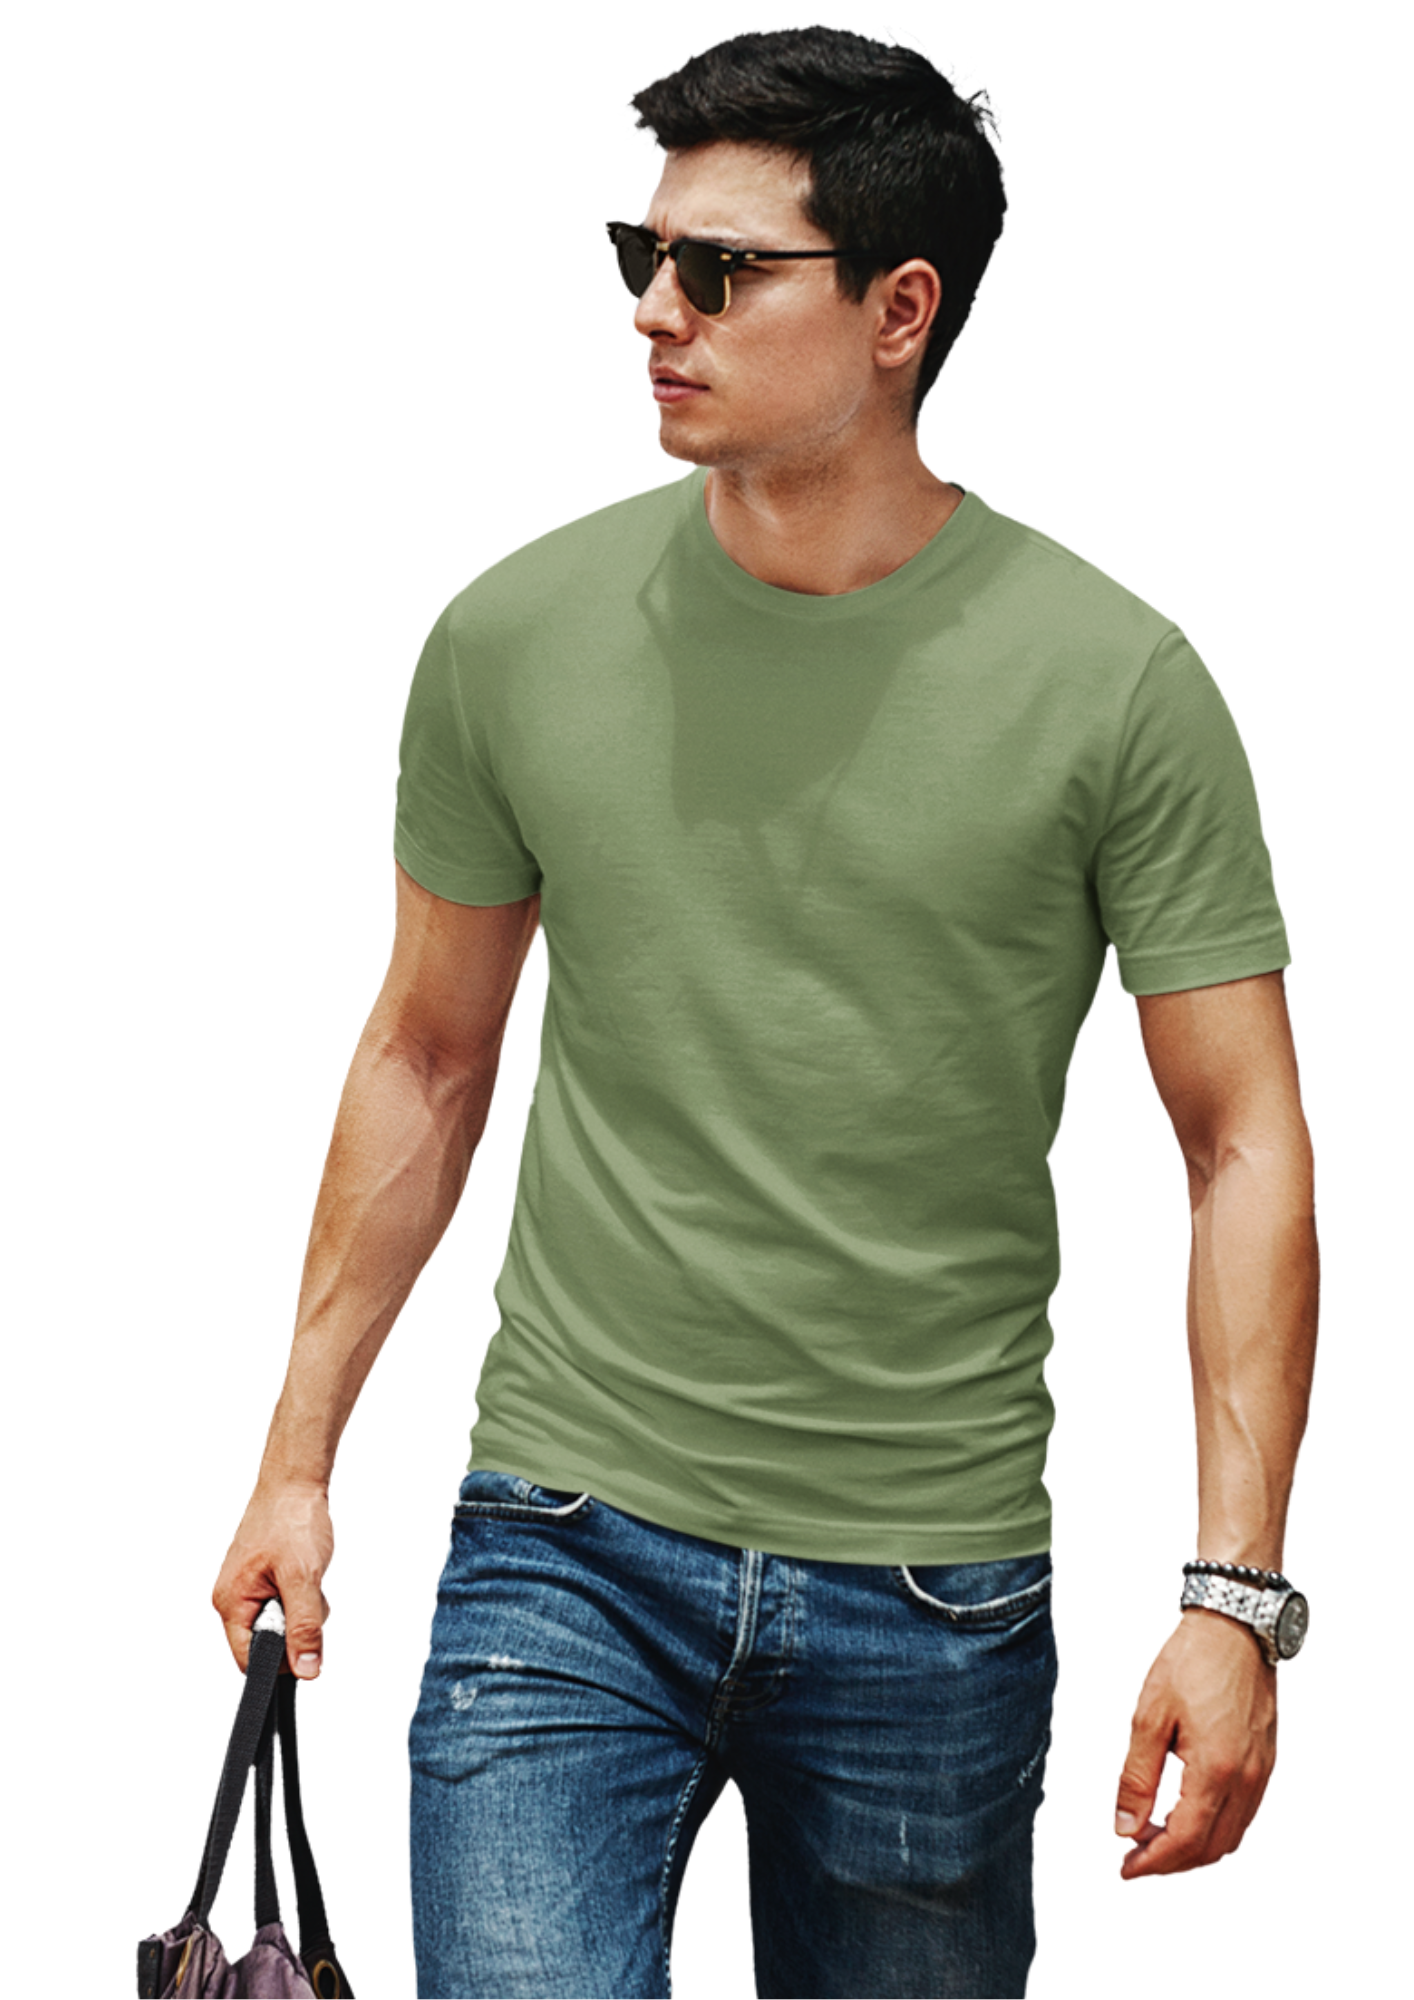 100% Compacted Combed Cotton White, Olive, Pine 3 T-shirts